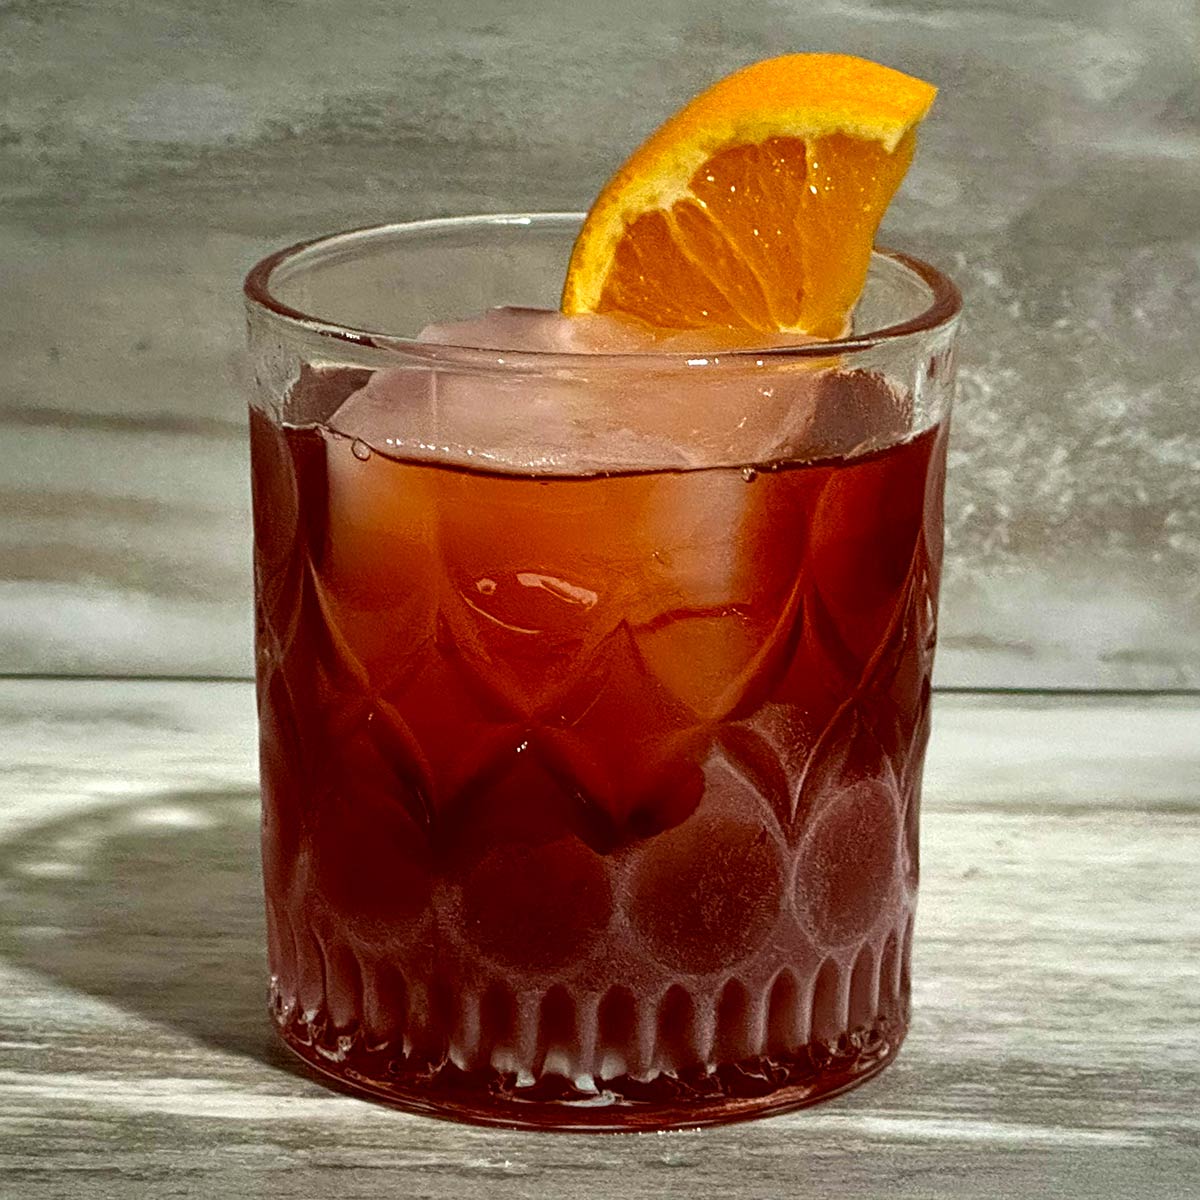 The Rieger's Boulevardier